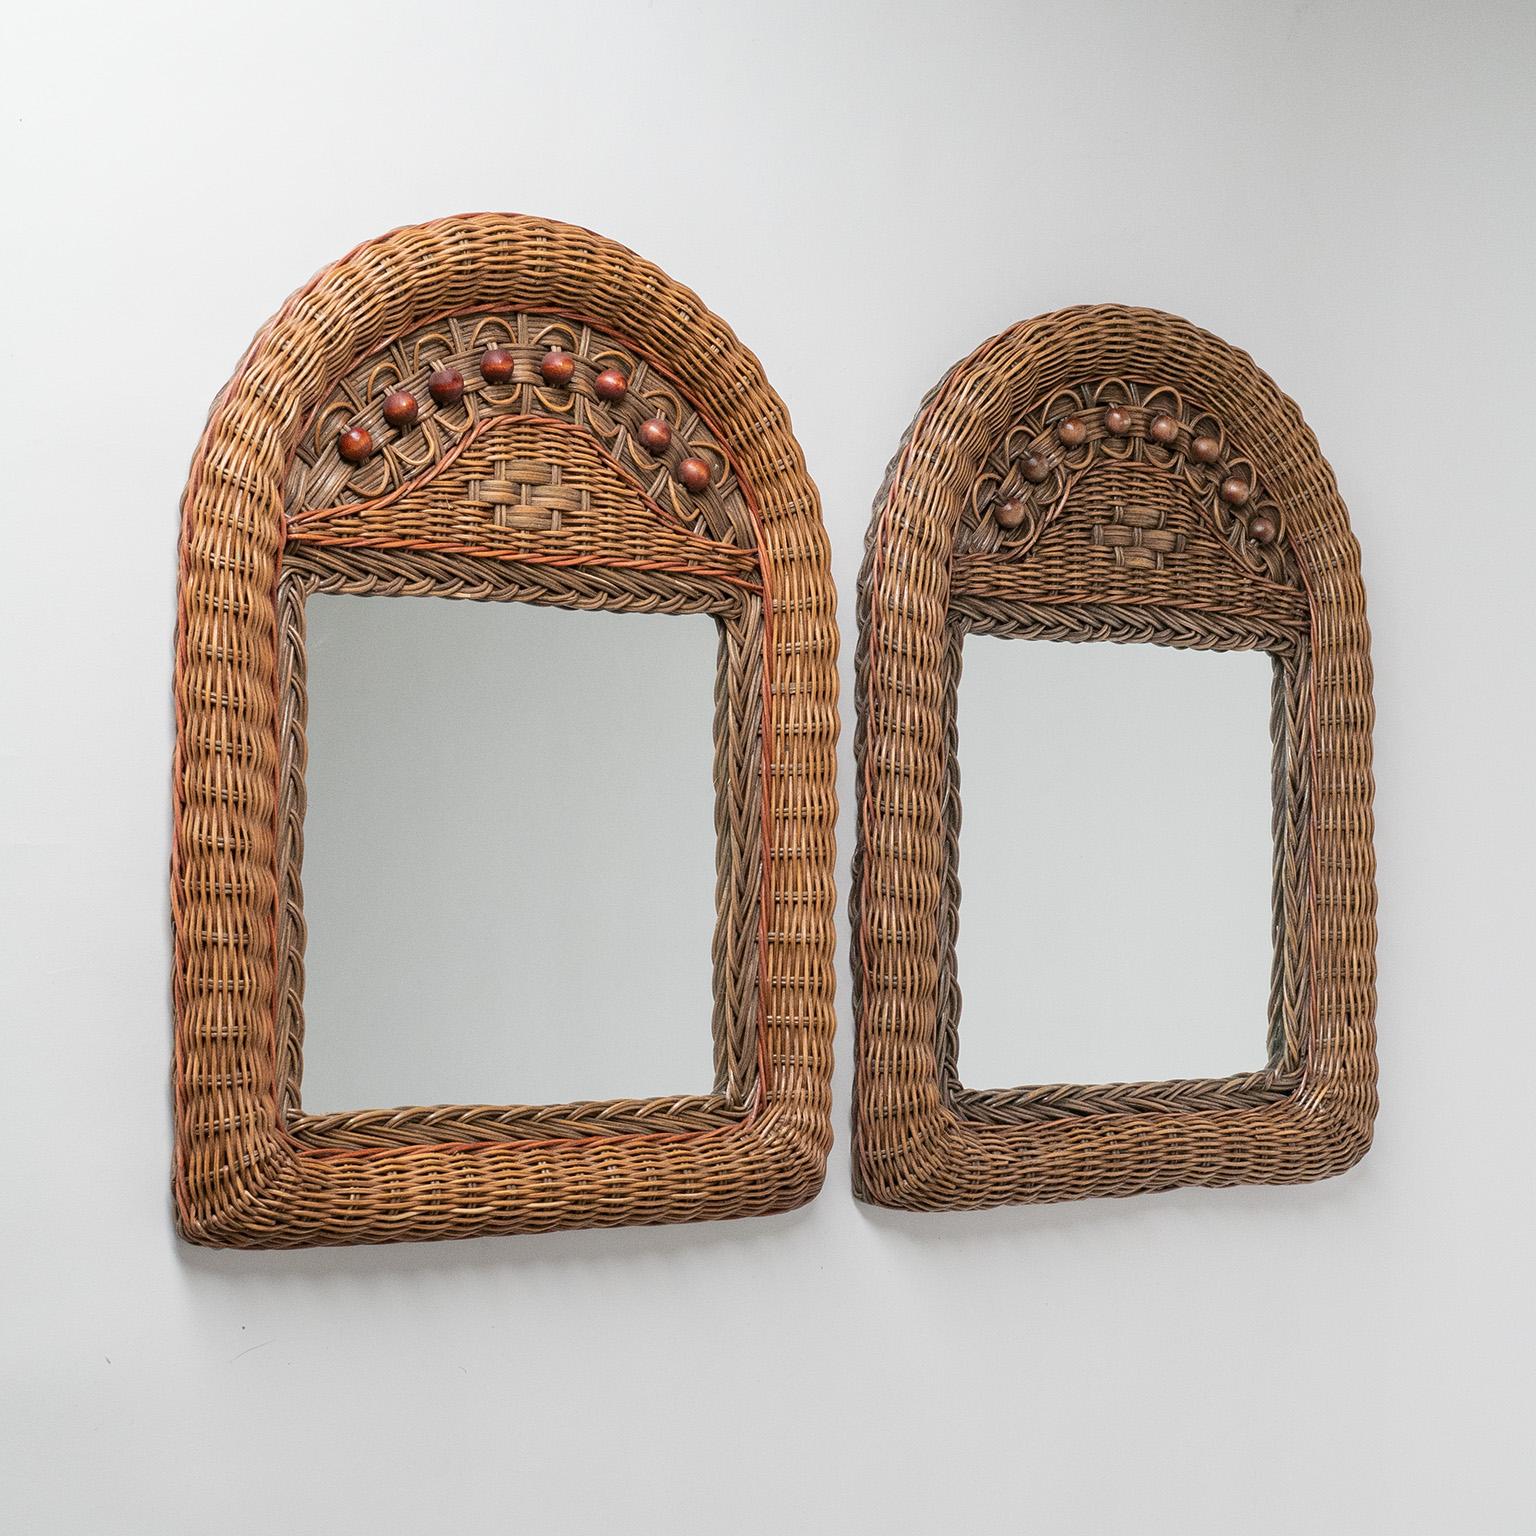 Charming pair of French wicker/rattan mirrors from the 1960-1970s. Intricate weaving techniques with color accents and wood beads. One is slightly more faded / less color.